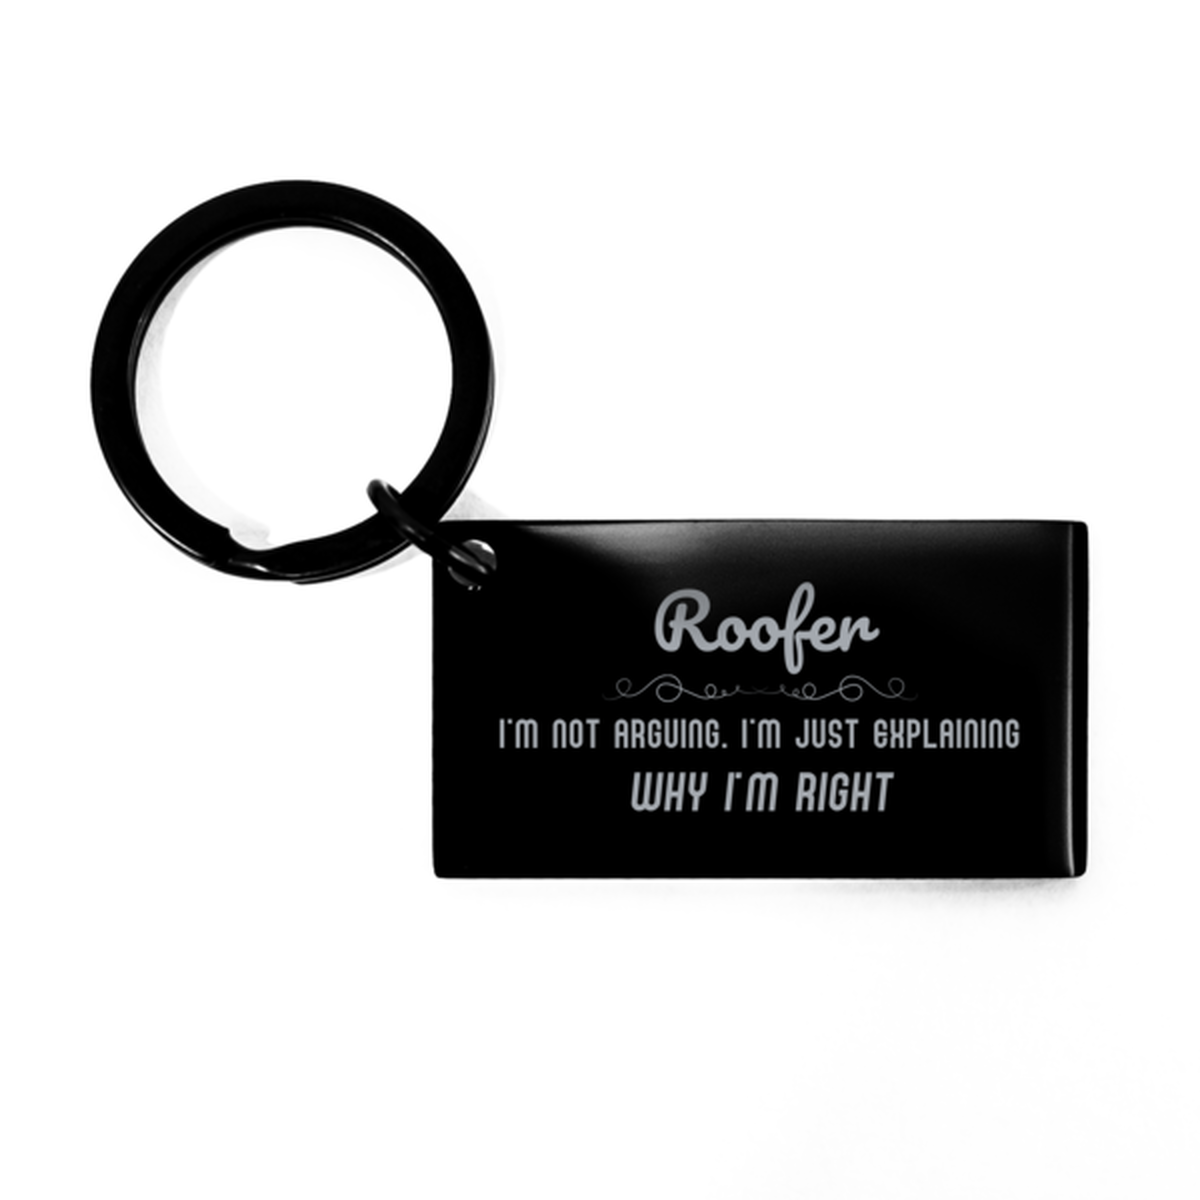 Roofer I'm not Arguing. I'm Just Explaining Why I'm RIGHT Keychain, Funny Saying Quote Roofer Gifts For Roofer Graduation Birthday Christmas Gifts for Men Women Coworker